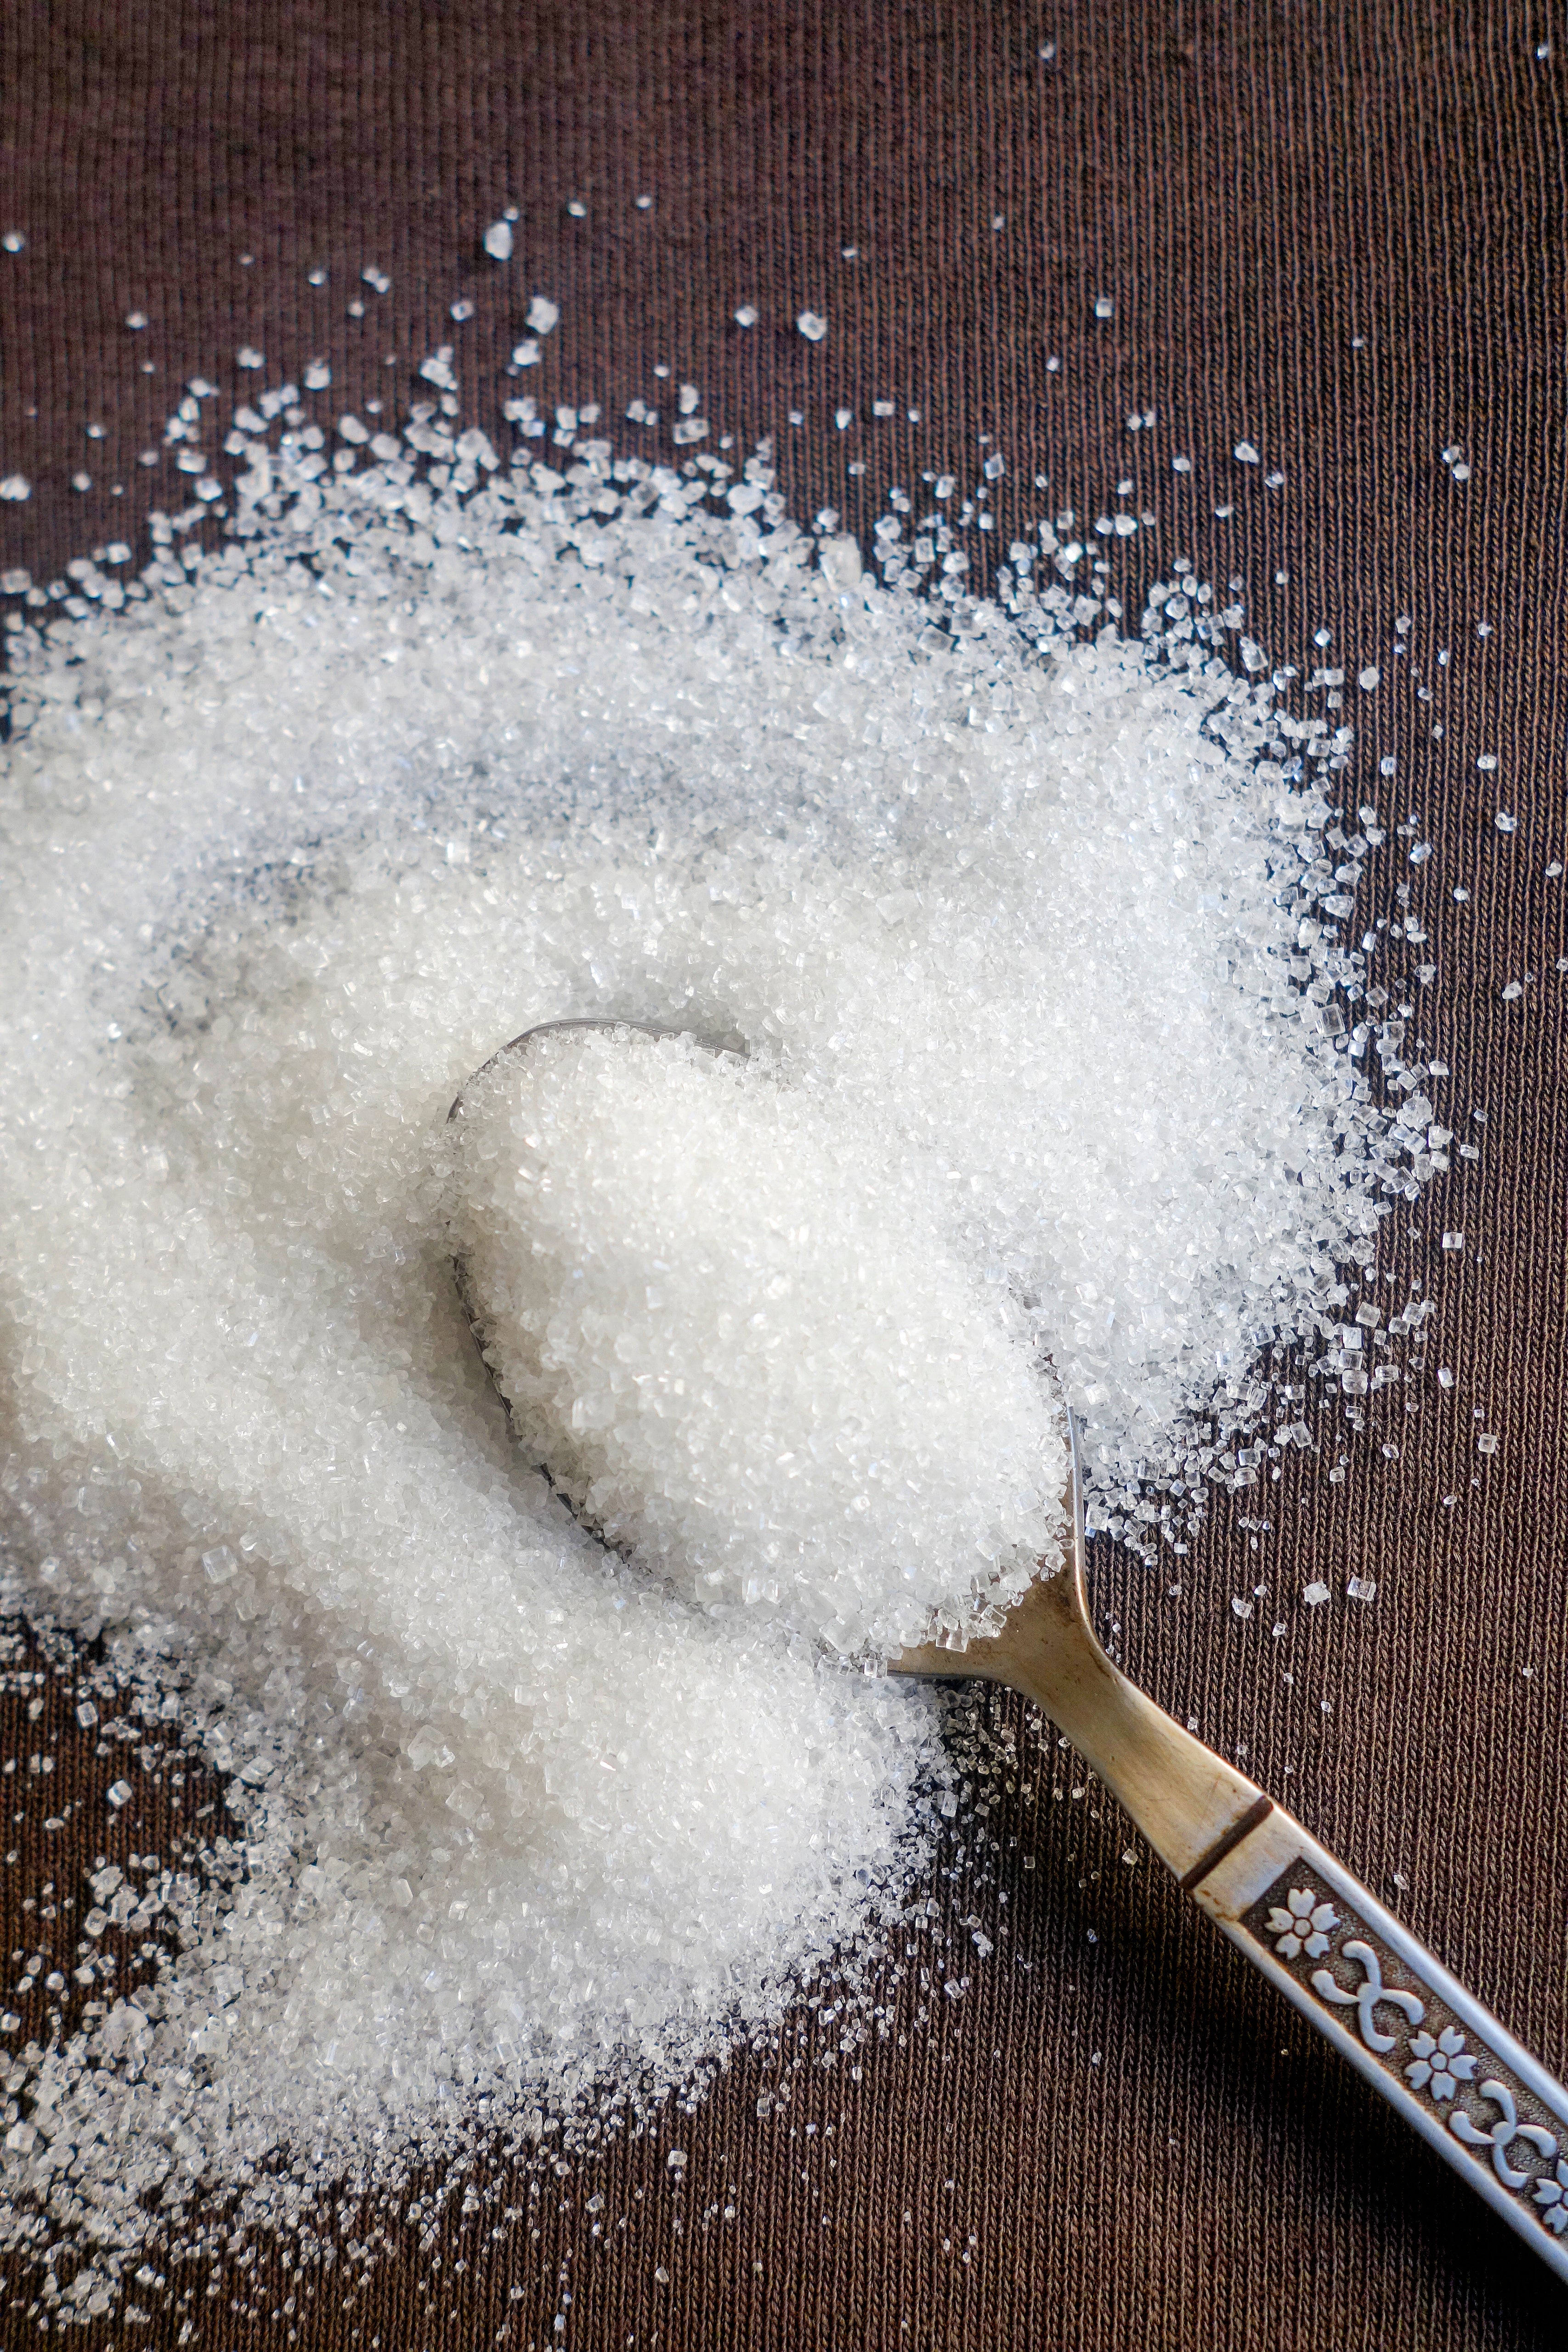 This Is How Sugar May 'Fuel' Cancer Cells
